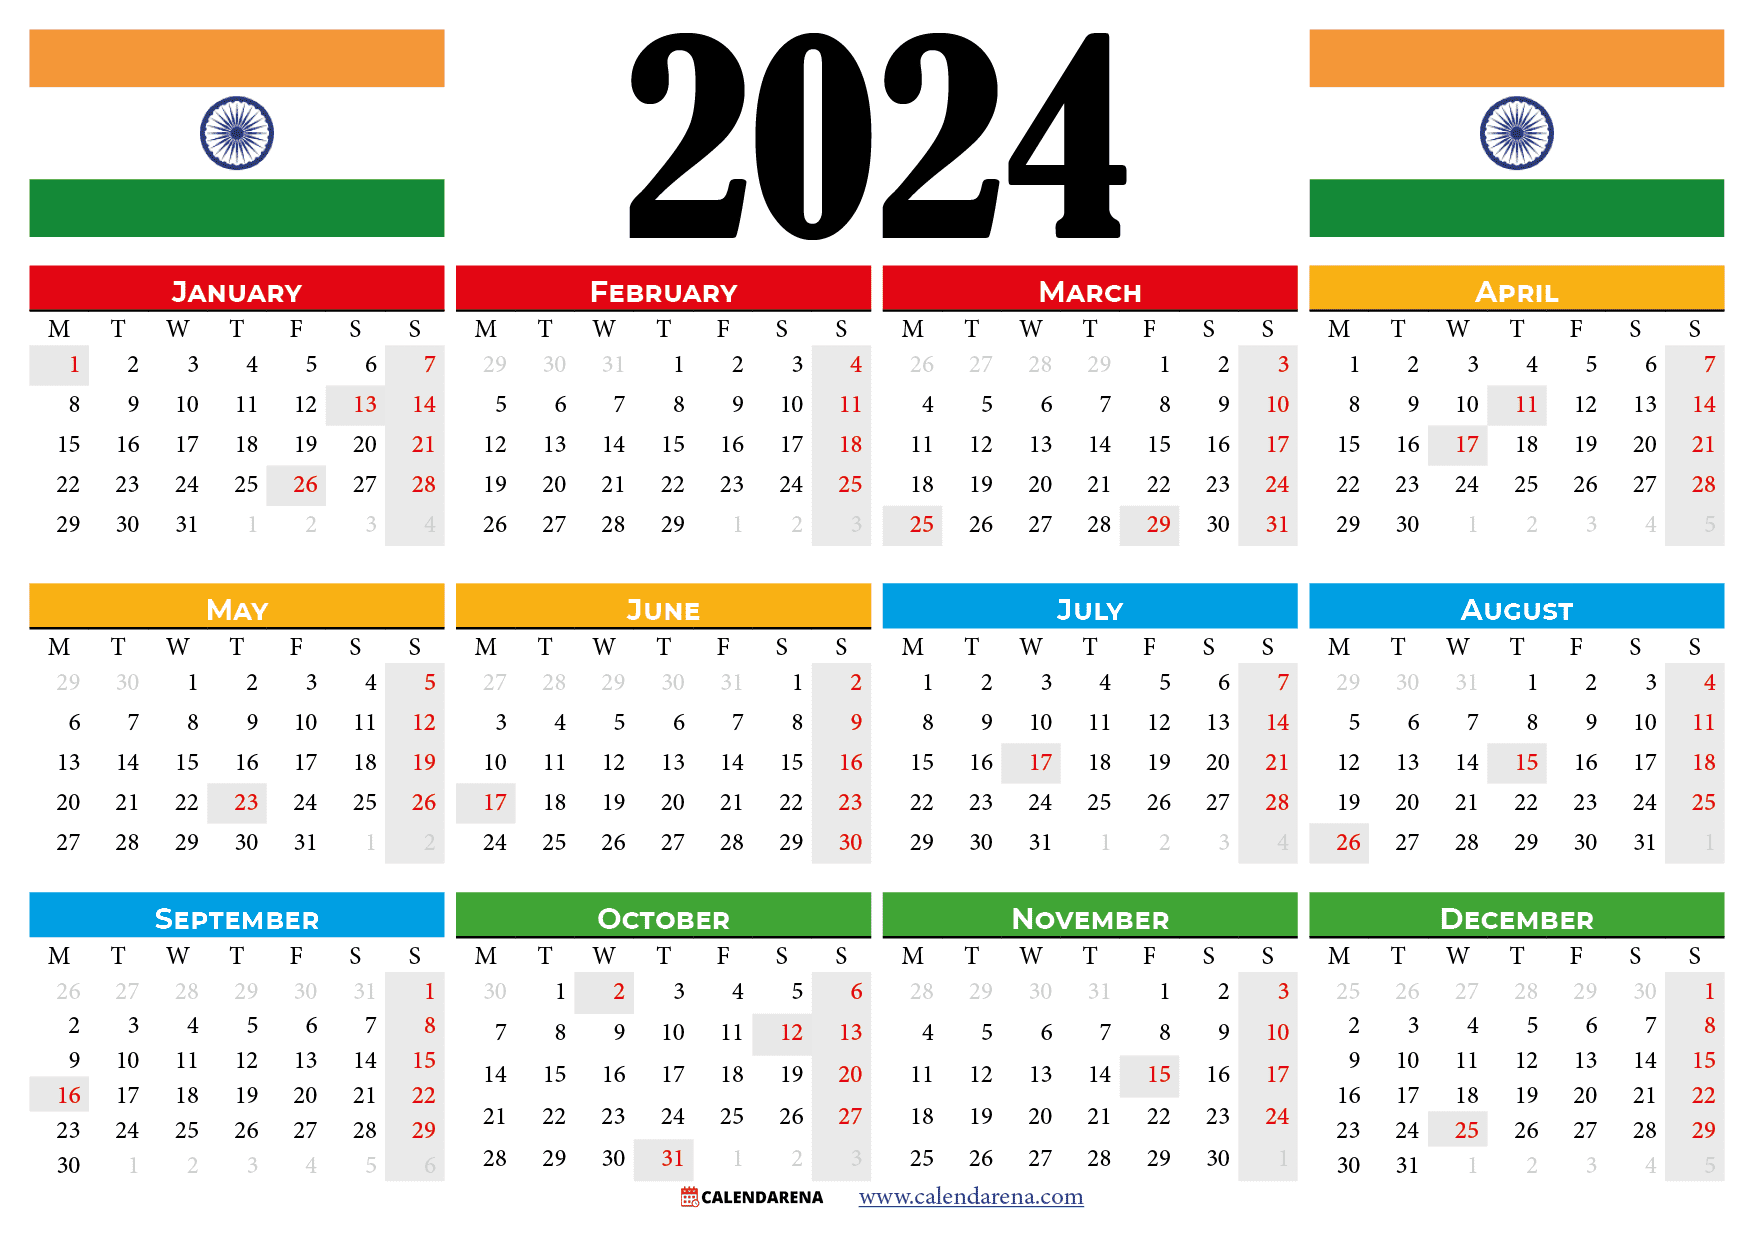 Public Holidays in India 2024: Dates and Celebrations